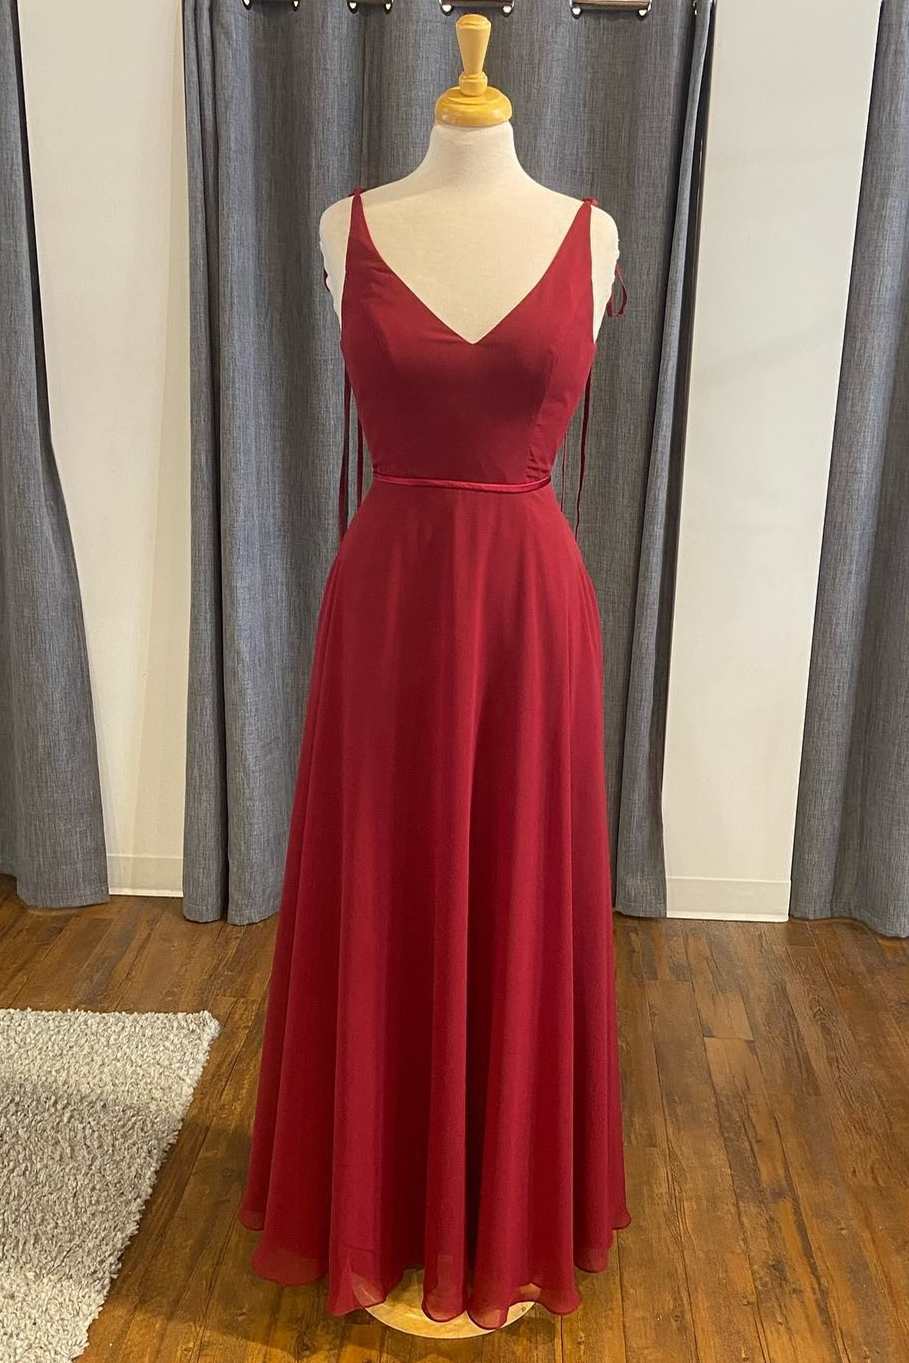 Functional Dress, Simple Red Chiffon V-Neck A-Line Formal Dress